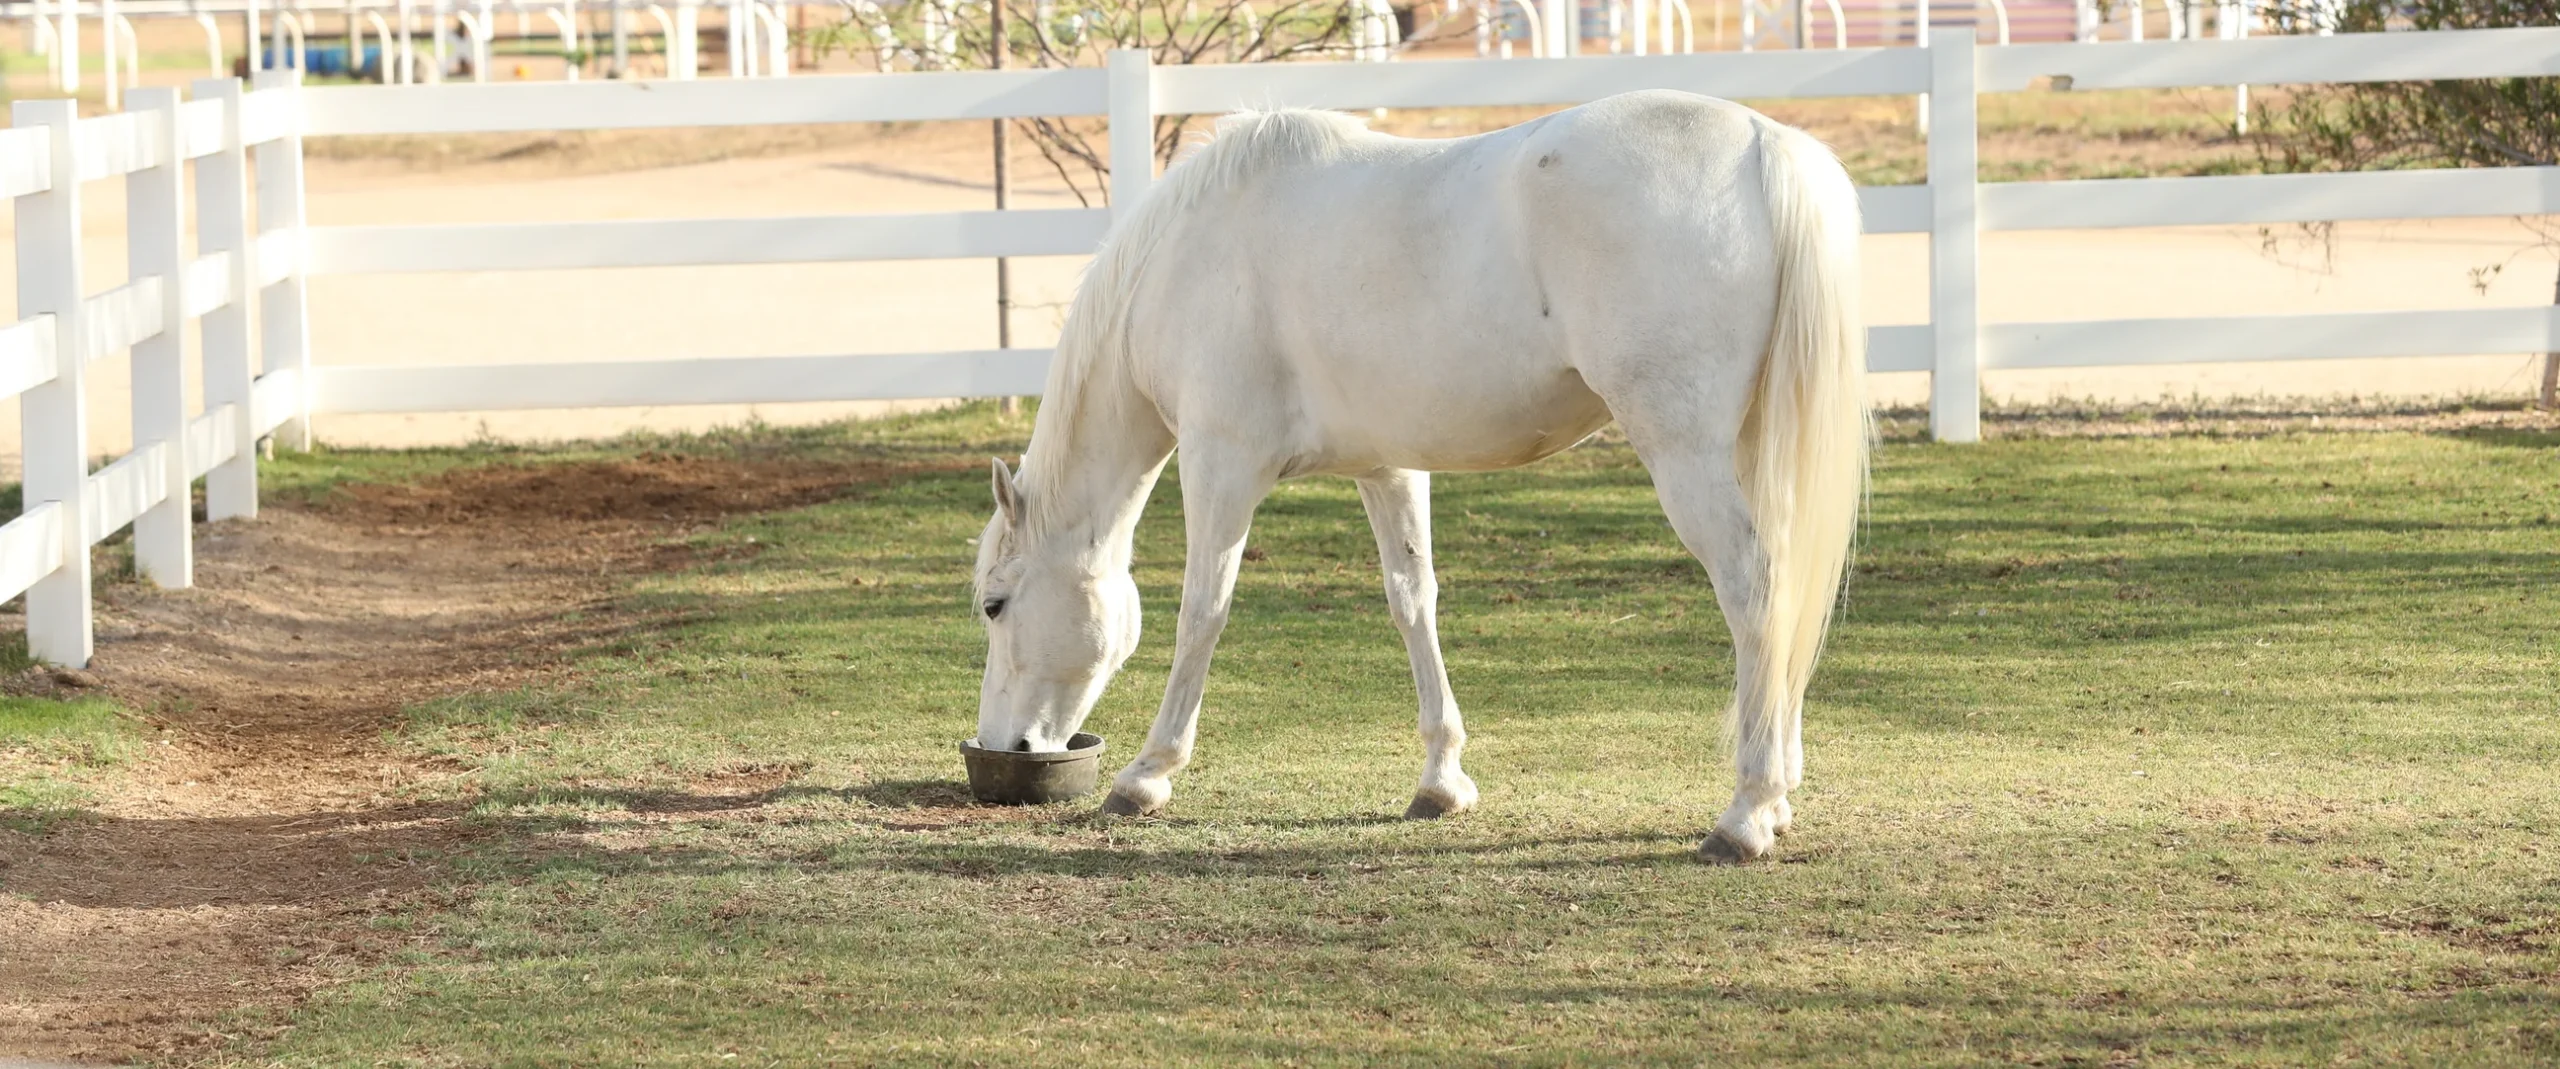 White horse in pasture eating from a bucket